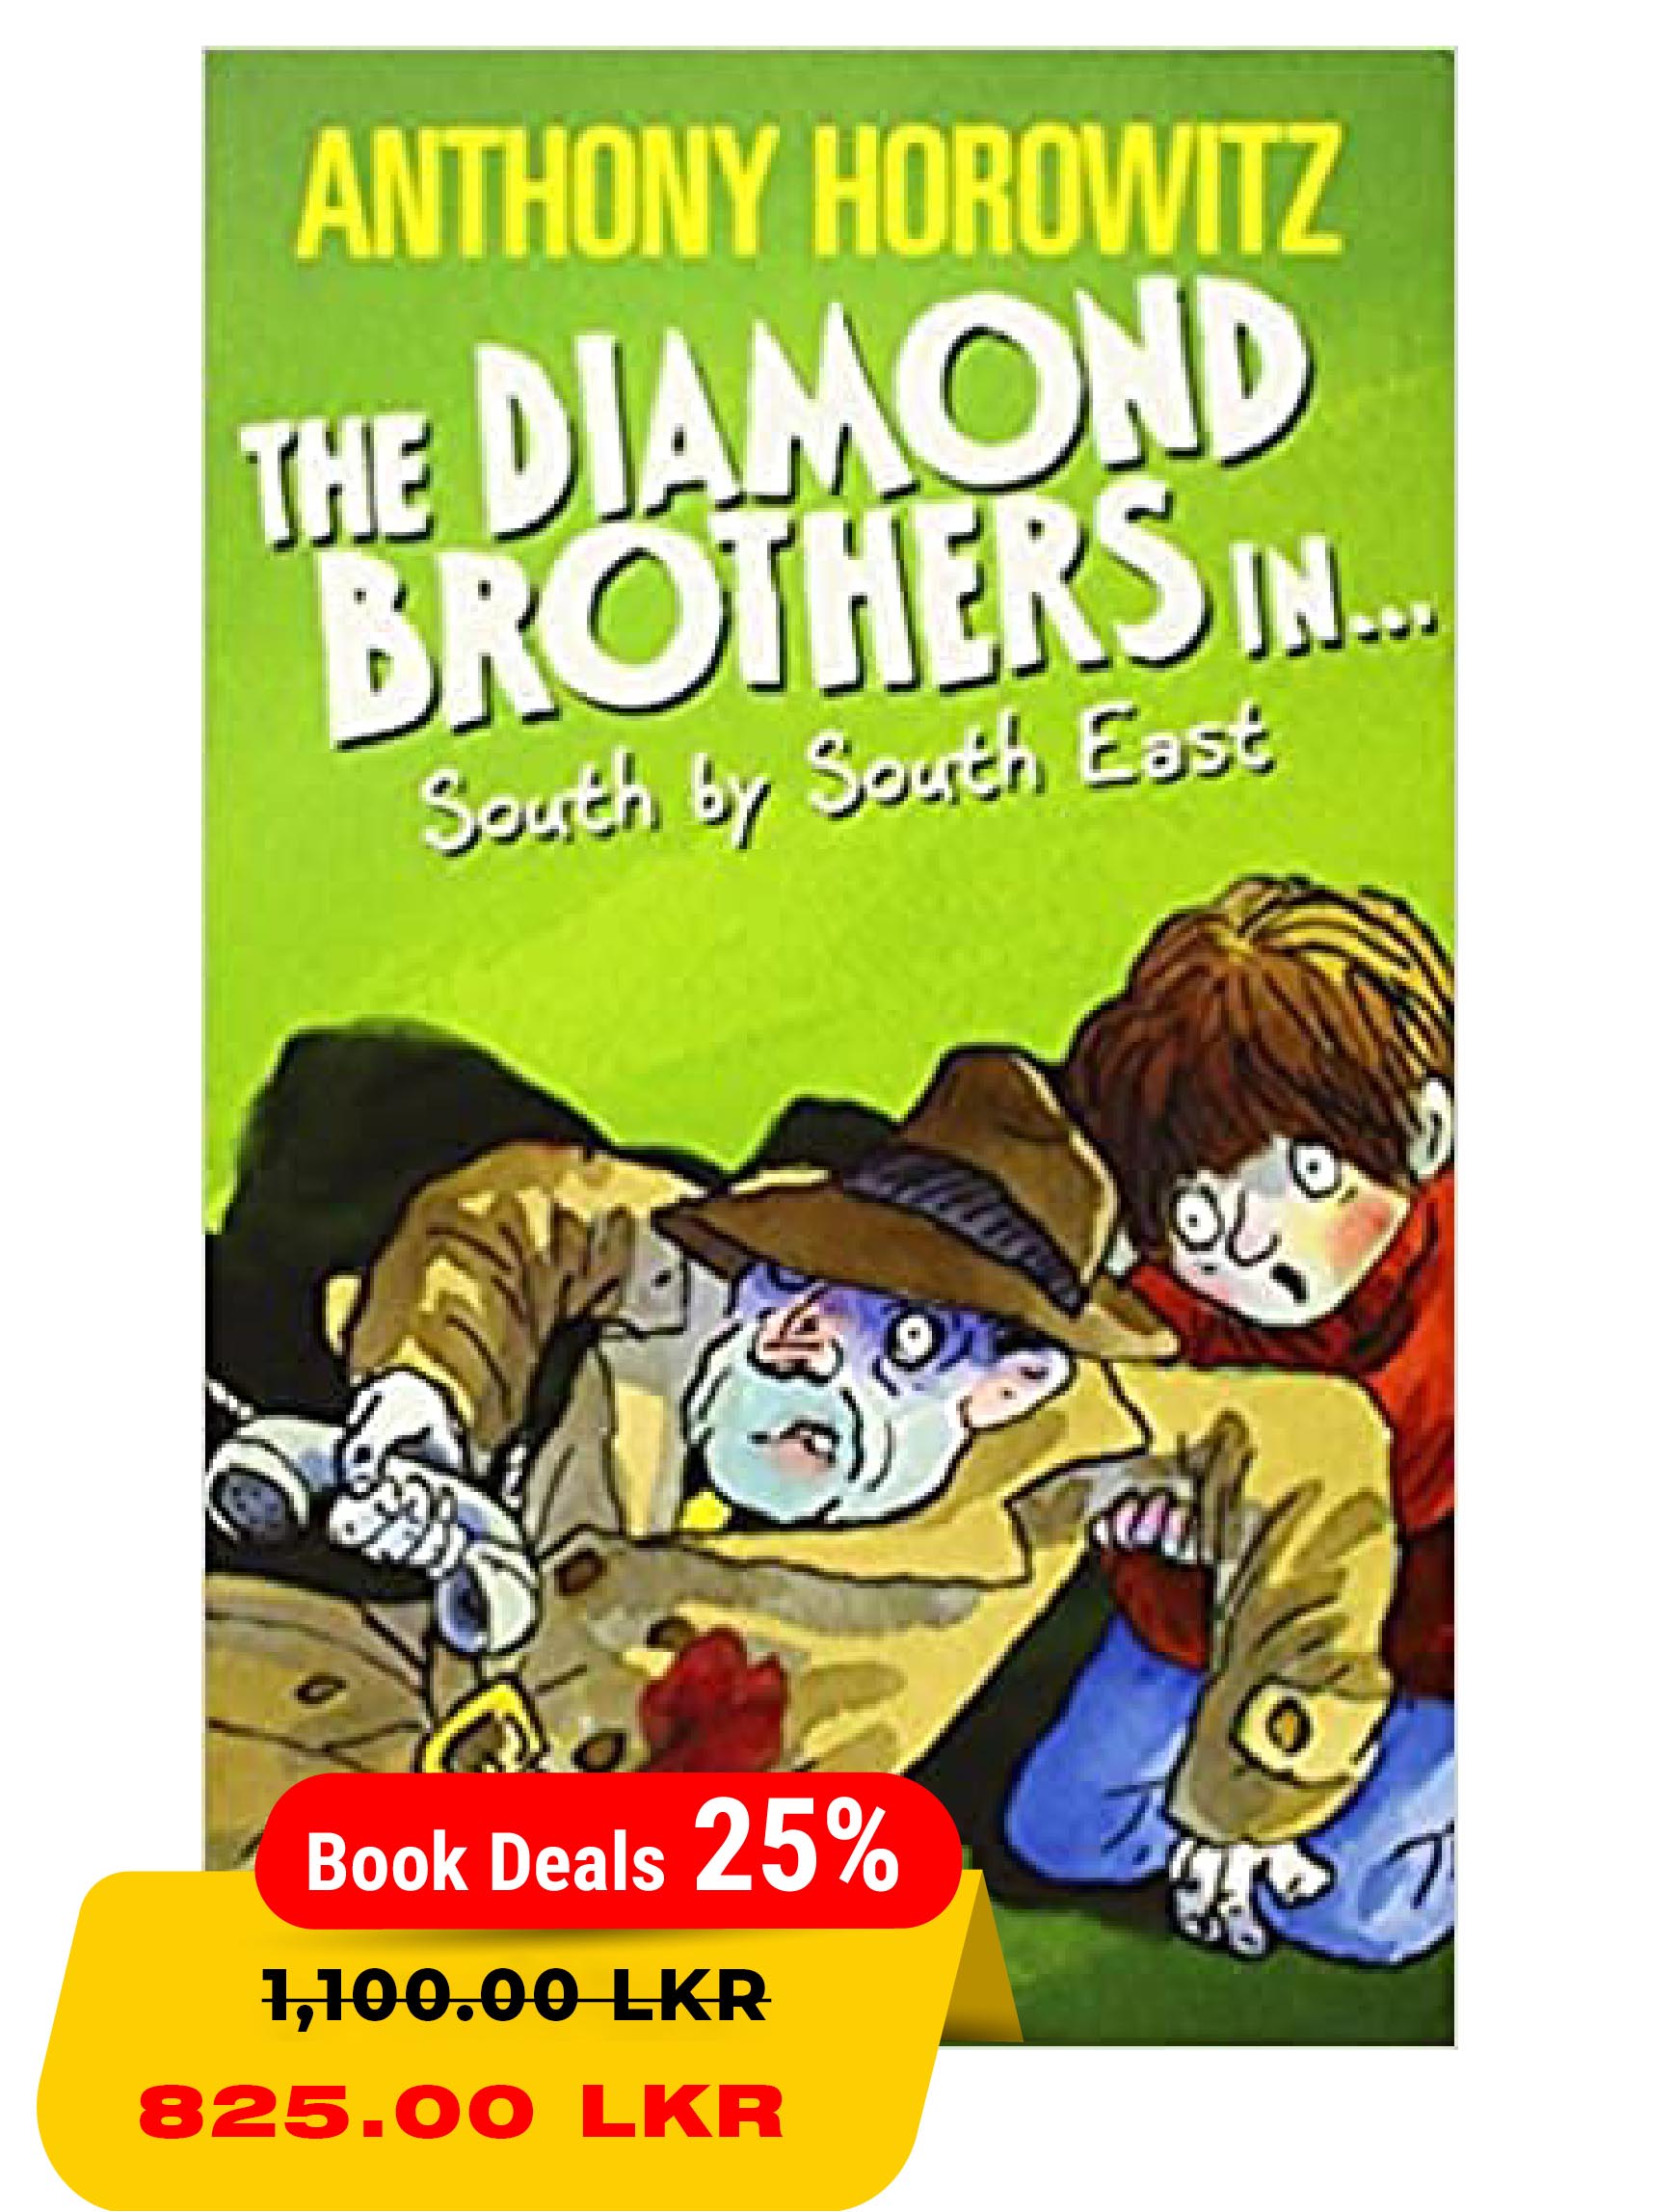 The Diamond Brothers In : South by South East